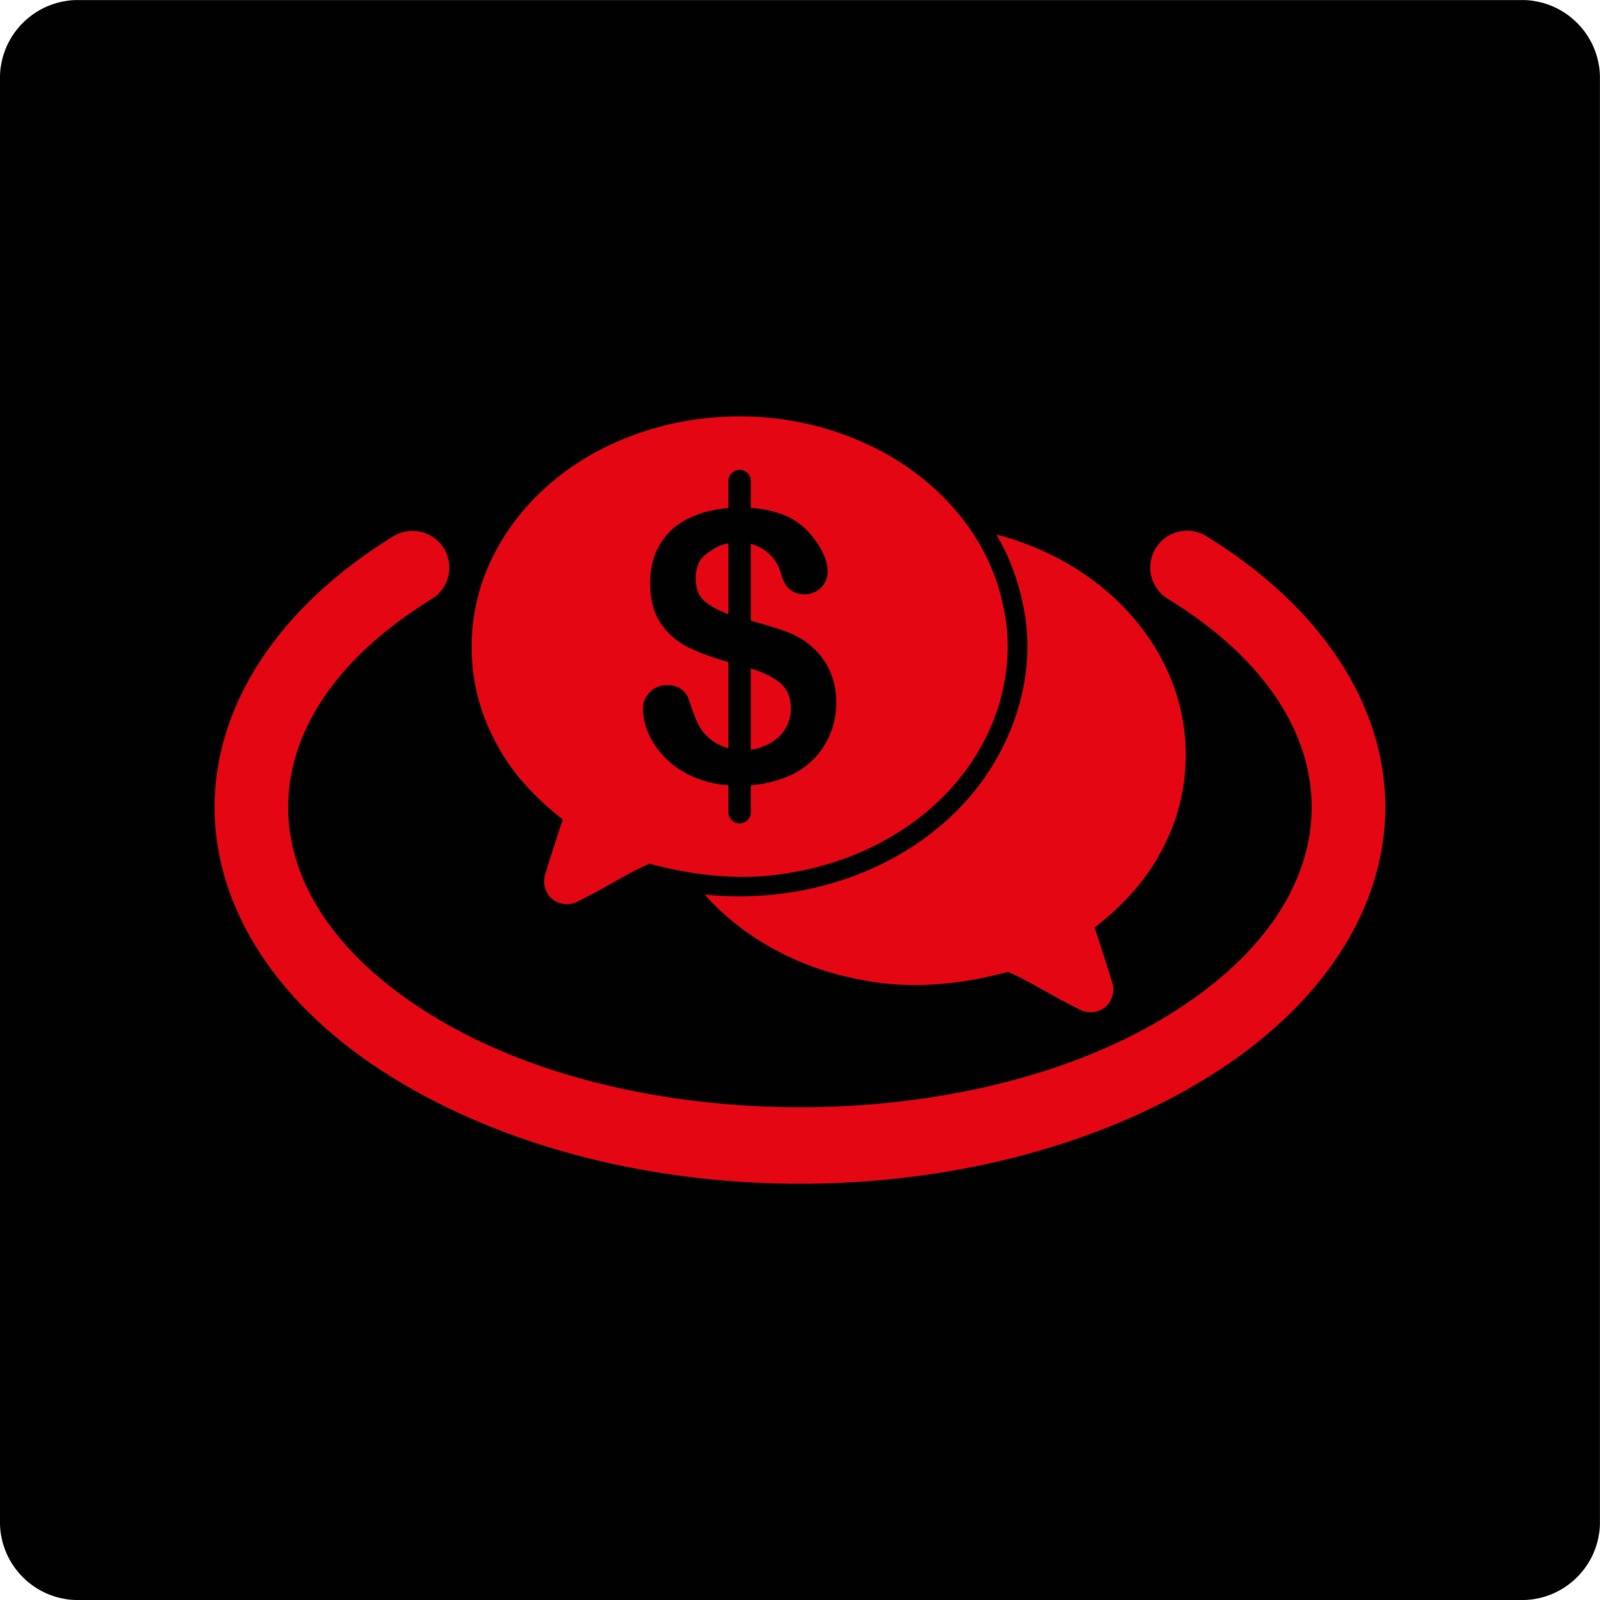 Financial Network icon. This flat rounded square button uses intensive red and black colors and isolated on a white background.